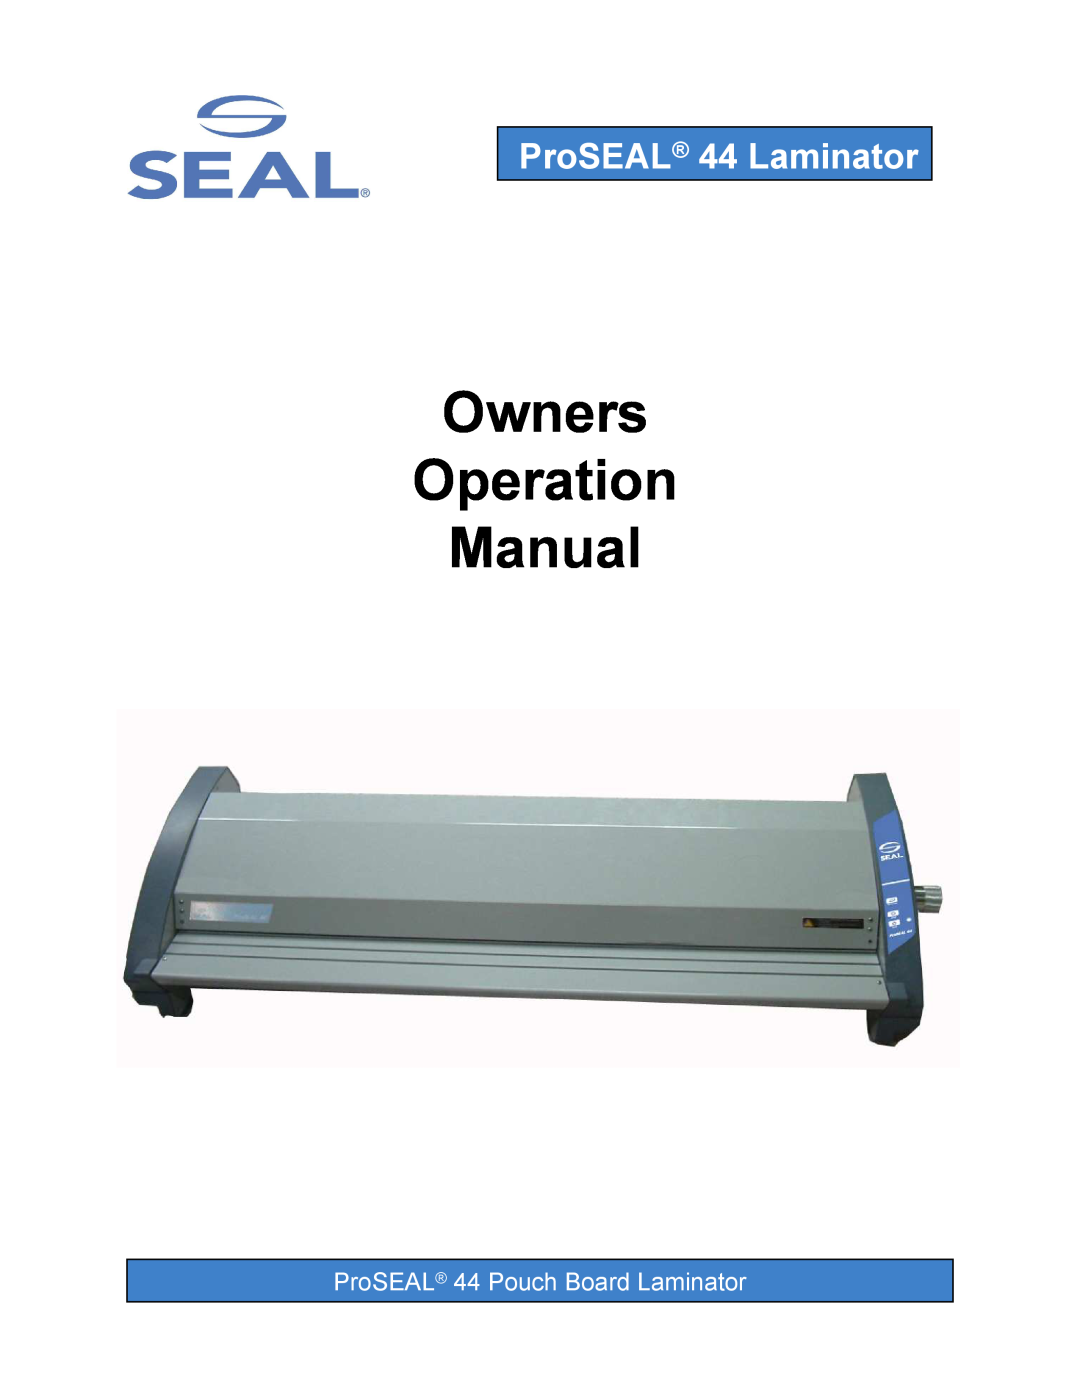 SEAL operation manual ProSEAL 44 Pouch Board Laminator, Owners Operation Manual, ProSEAL 44 Laminator 